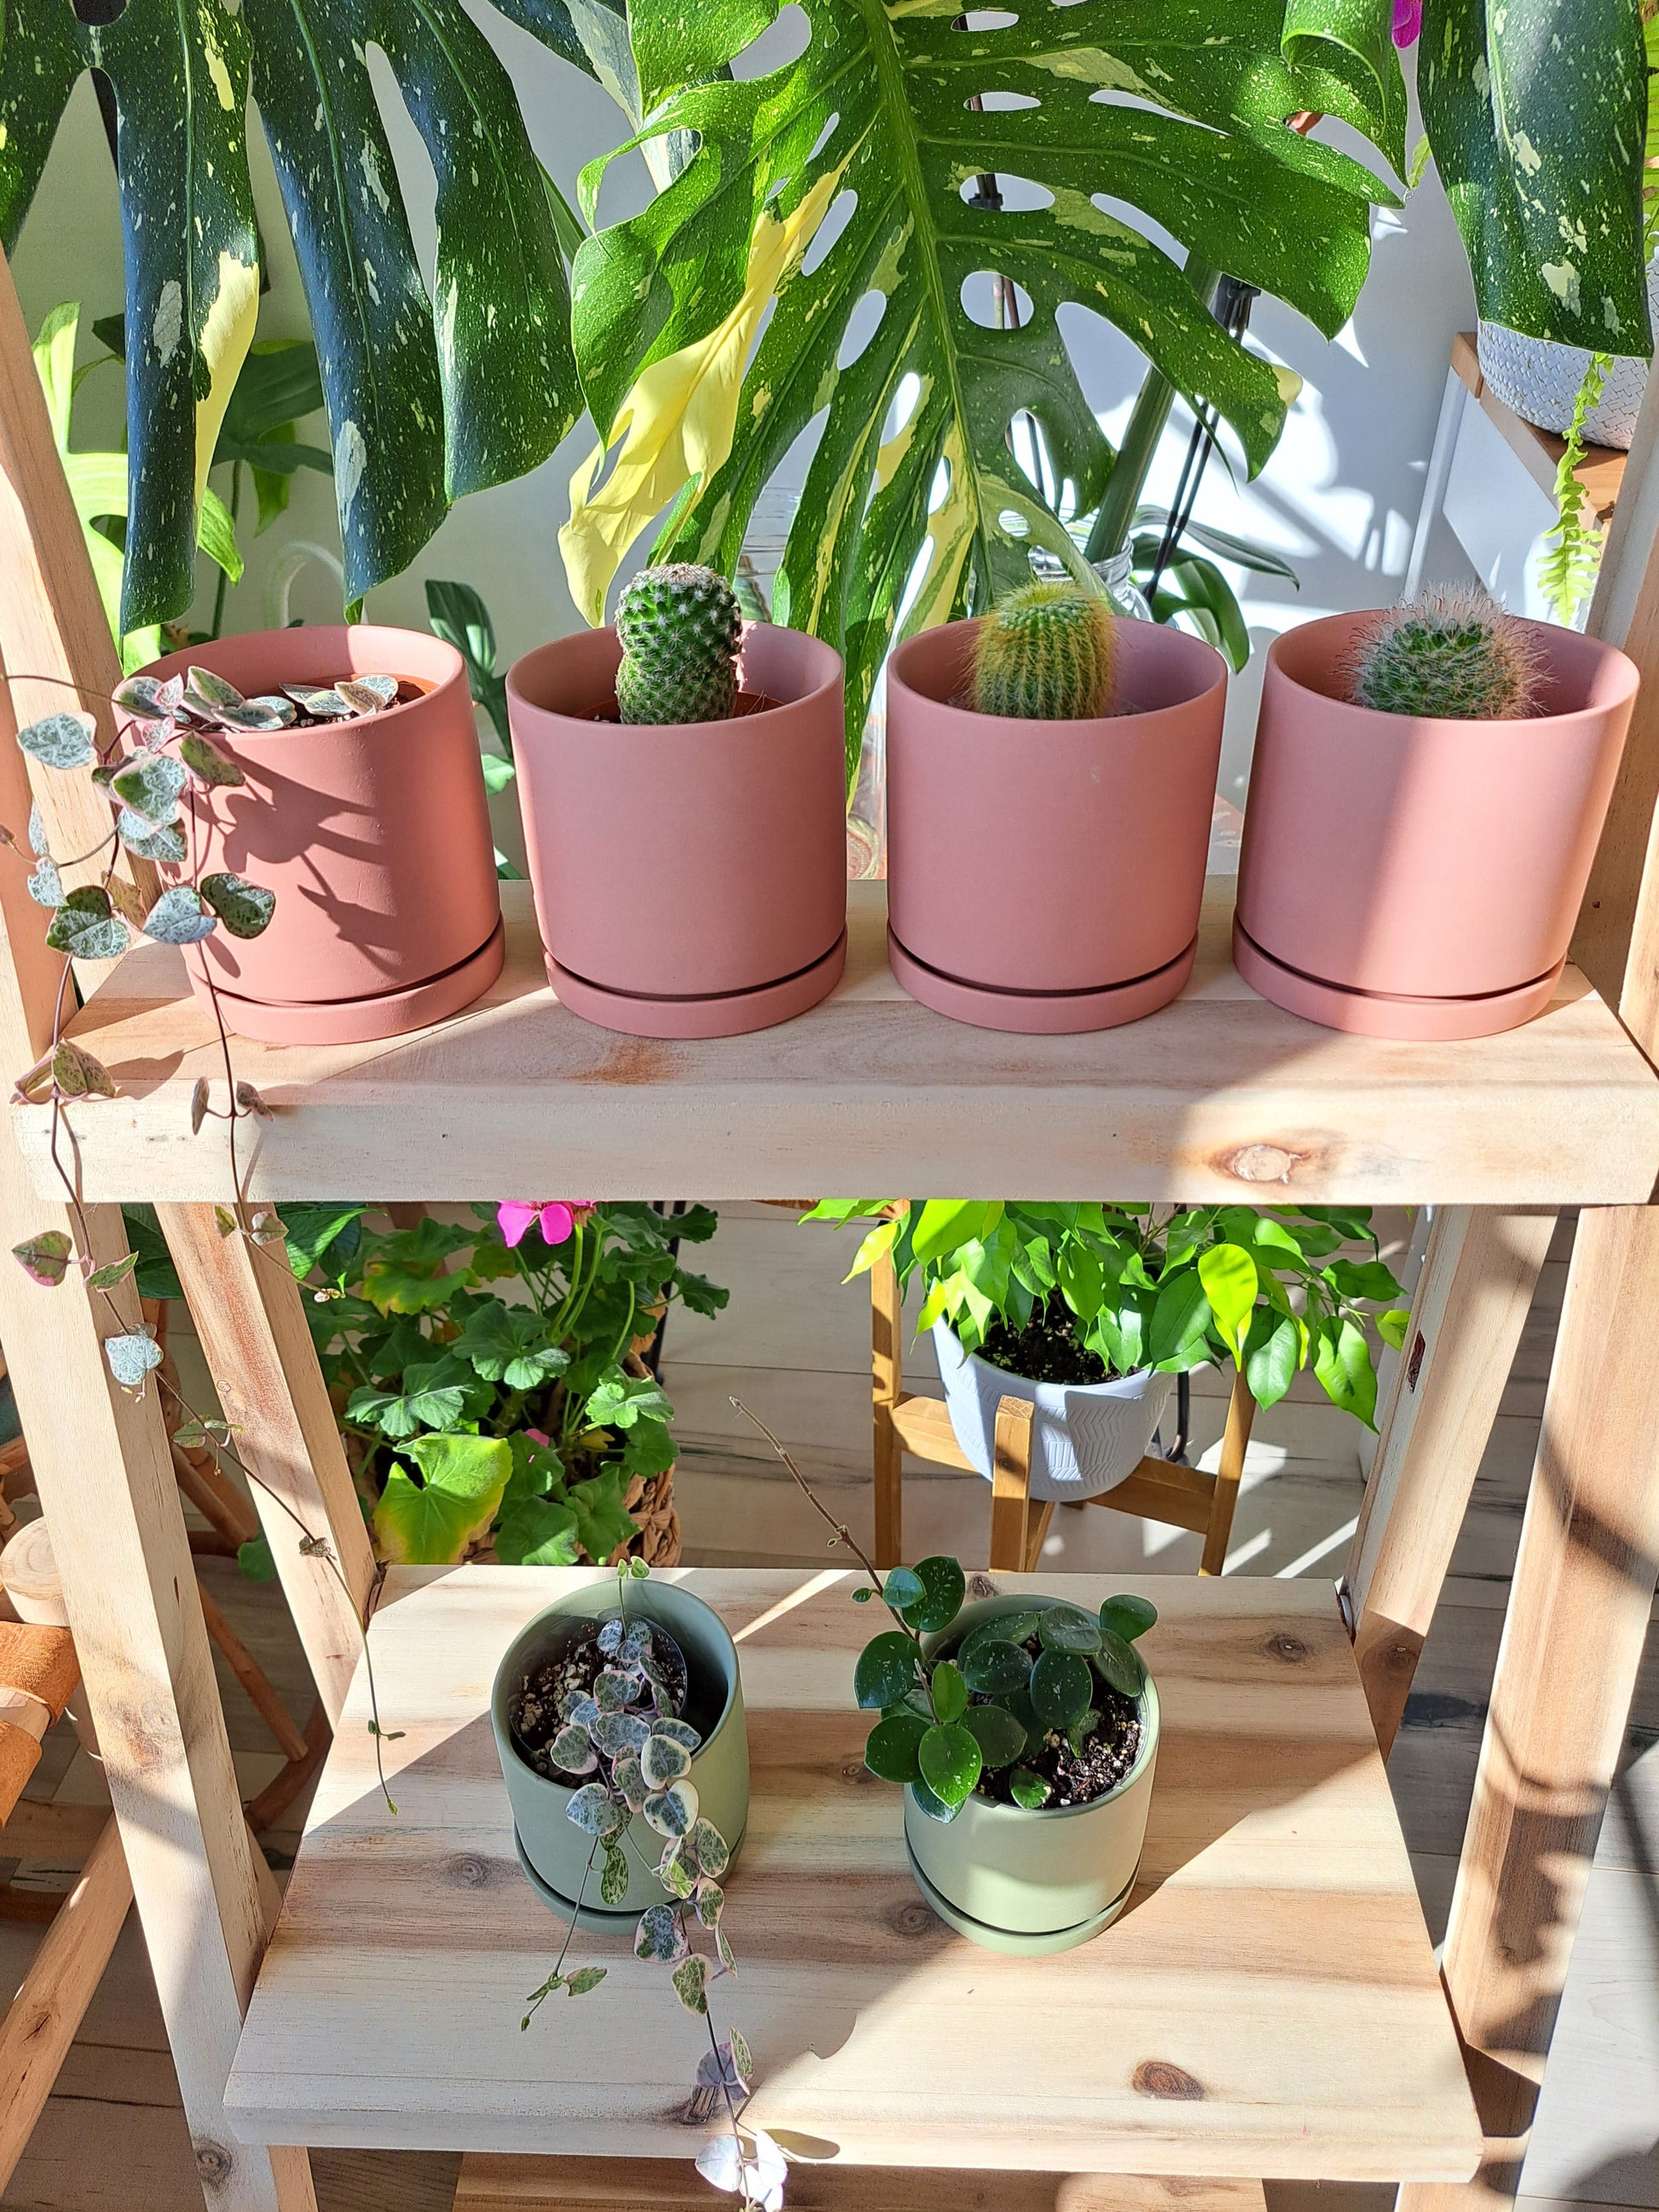 Assorted plants in 3.5" clay pots. With a pastel, completely matte finish, these clay pots have a modern, boho feel. Pots are available in blush pink or sage green and each pot comes with a drainage hole and saucer.  Plants include cacti, variegated string of hearts, and hoya mathilde. The plants pictured are the ones you will receive. Each item includes a plant in a plastic nursery pot as well as a clay pot.